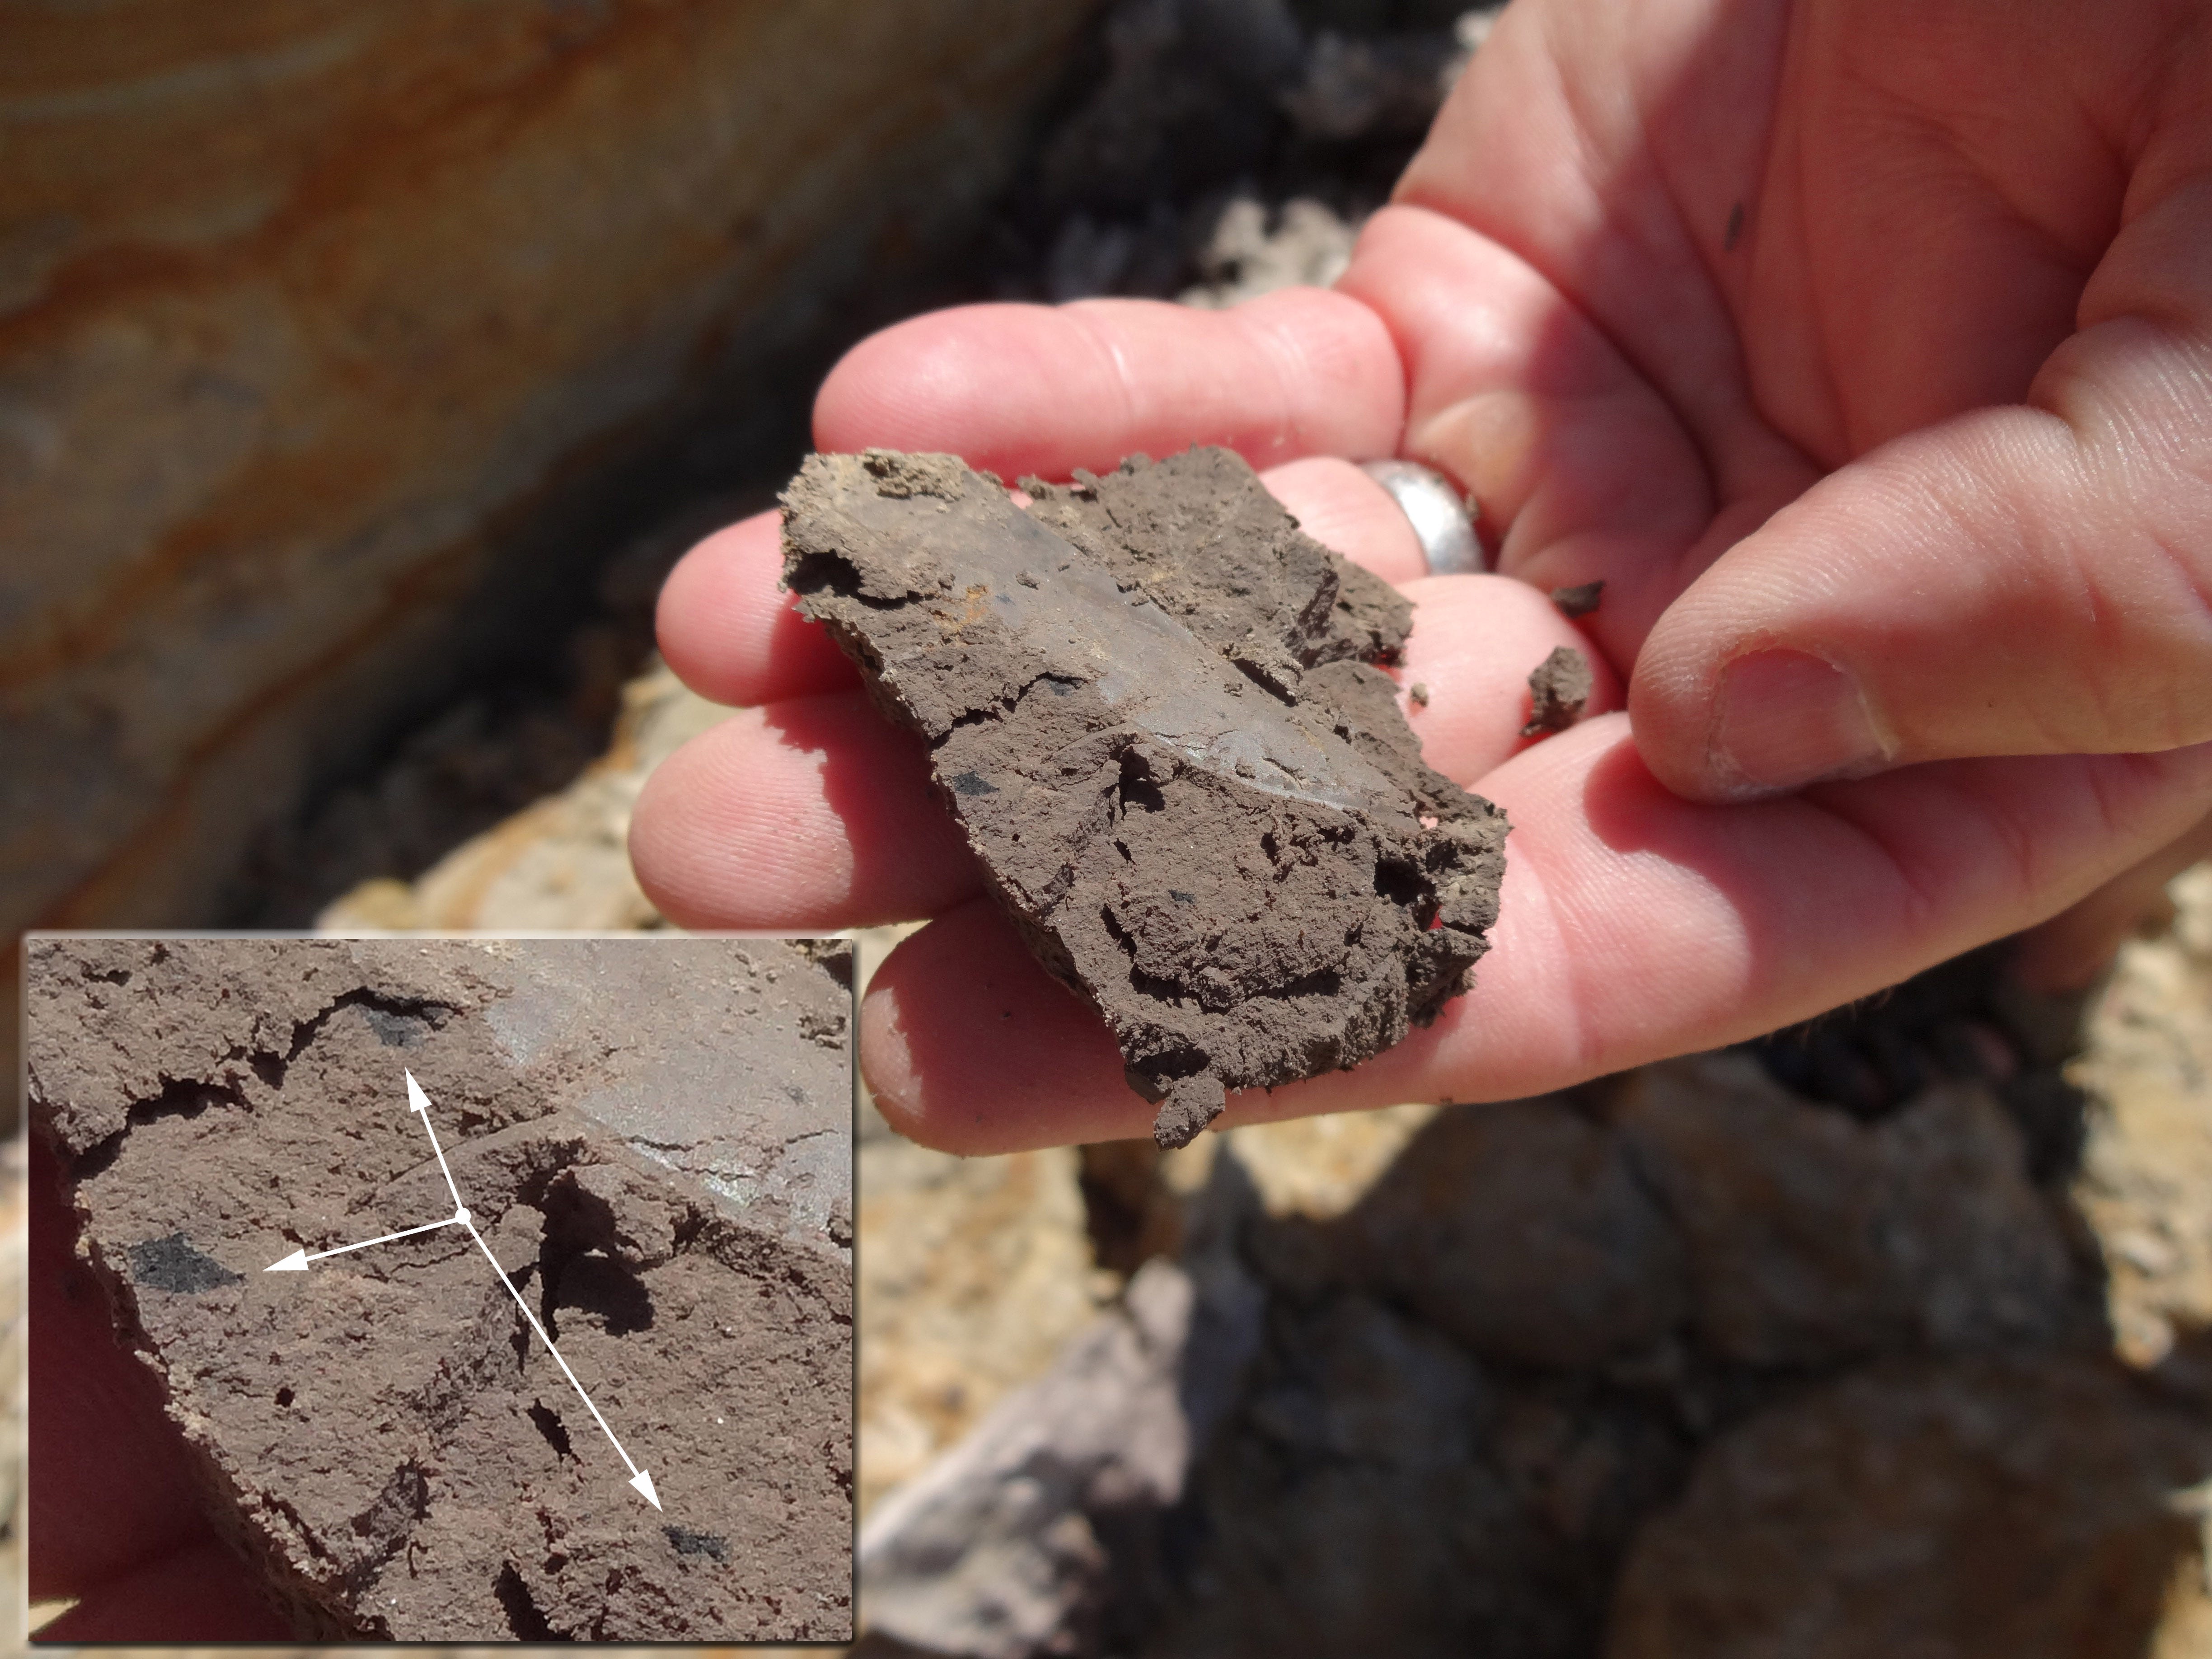 22,000-year-old artifacts could rewrite ancient human history in North America